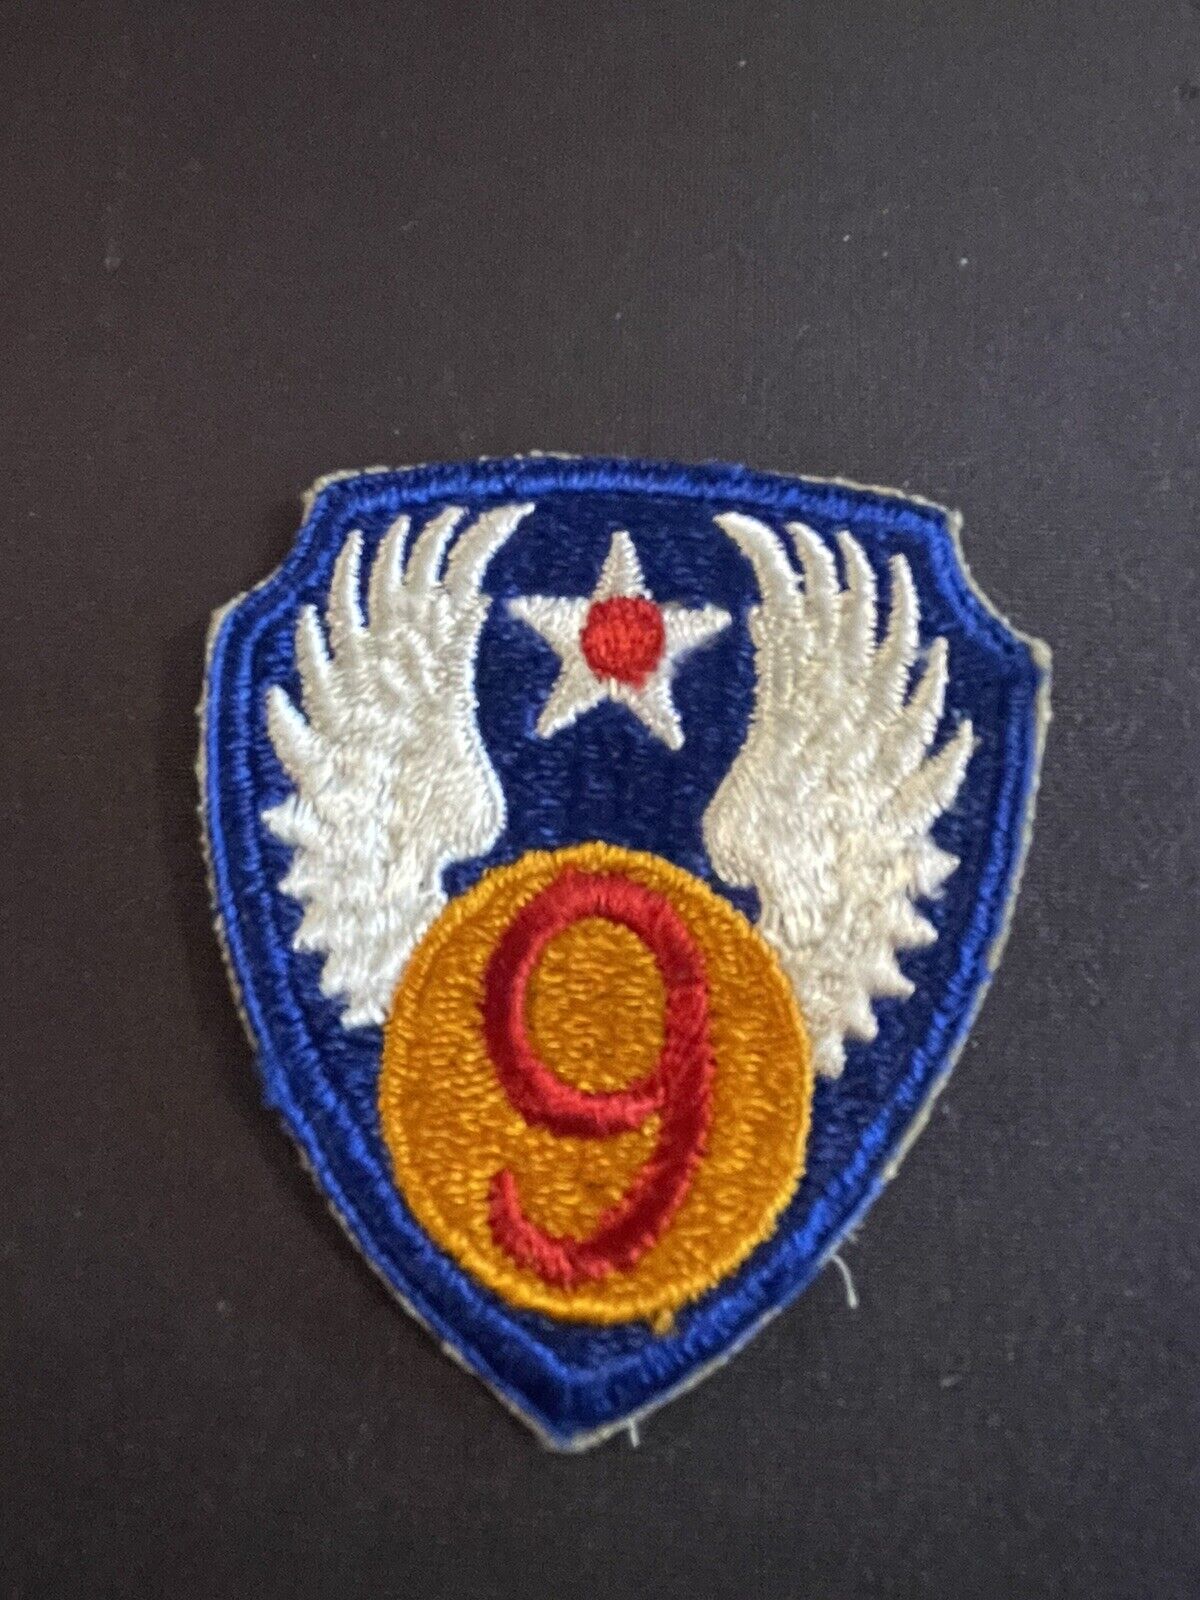 ORIGINAL WW2 9th AIR FORCE FACTORY ERROR PATCH RARE LOOK FOR OUR EXAMPLES #2